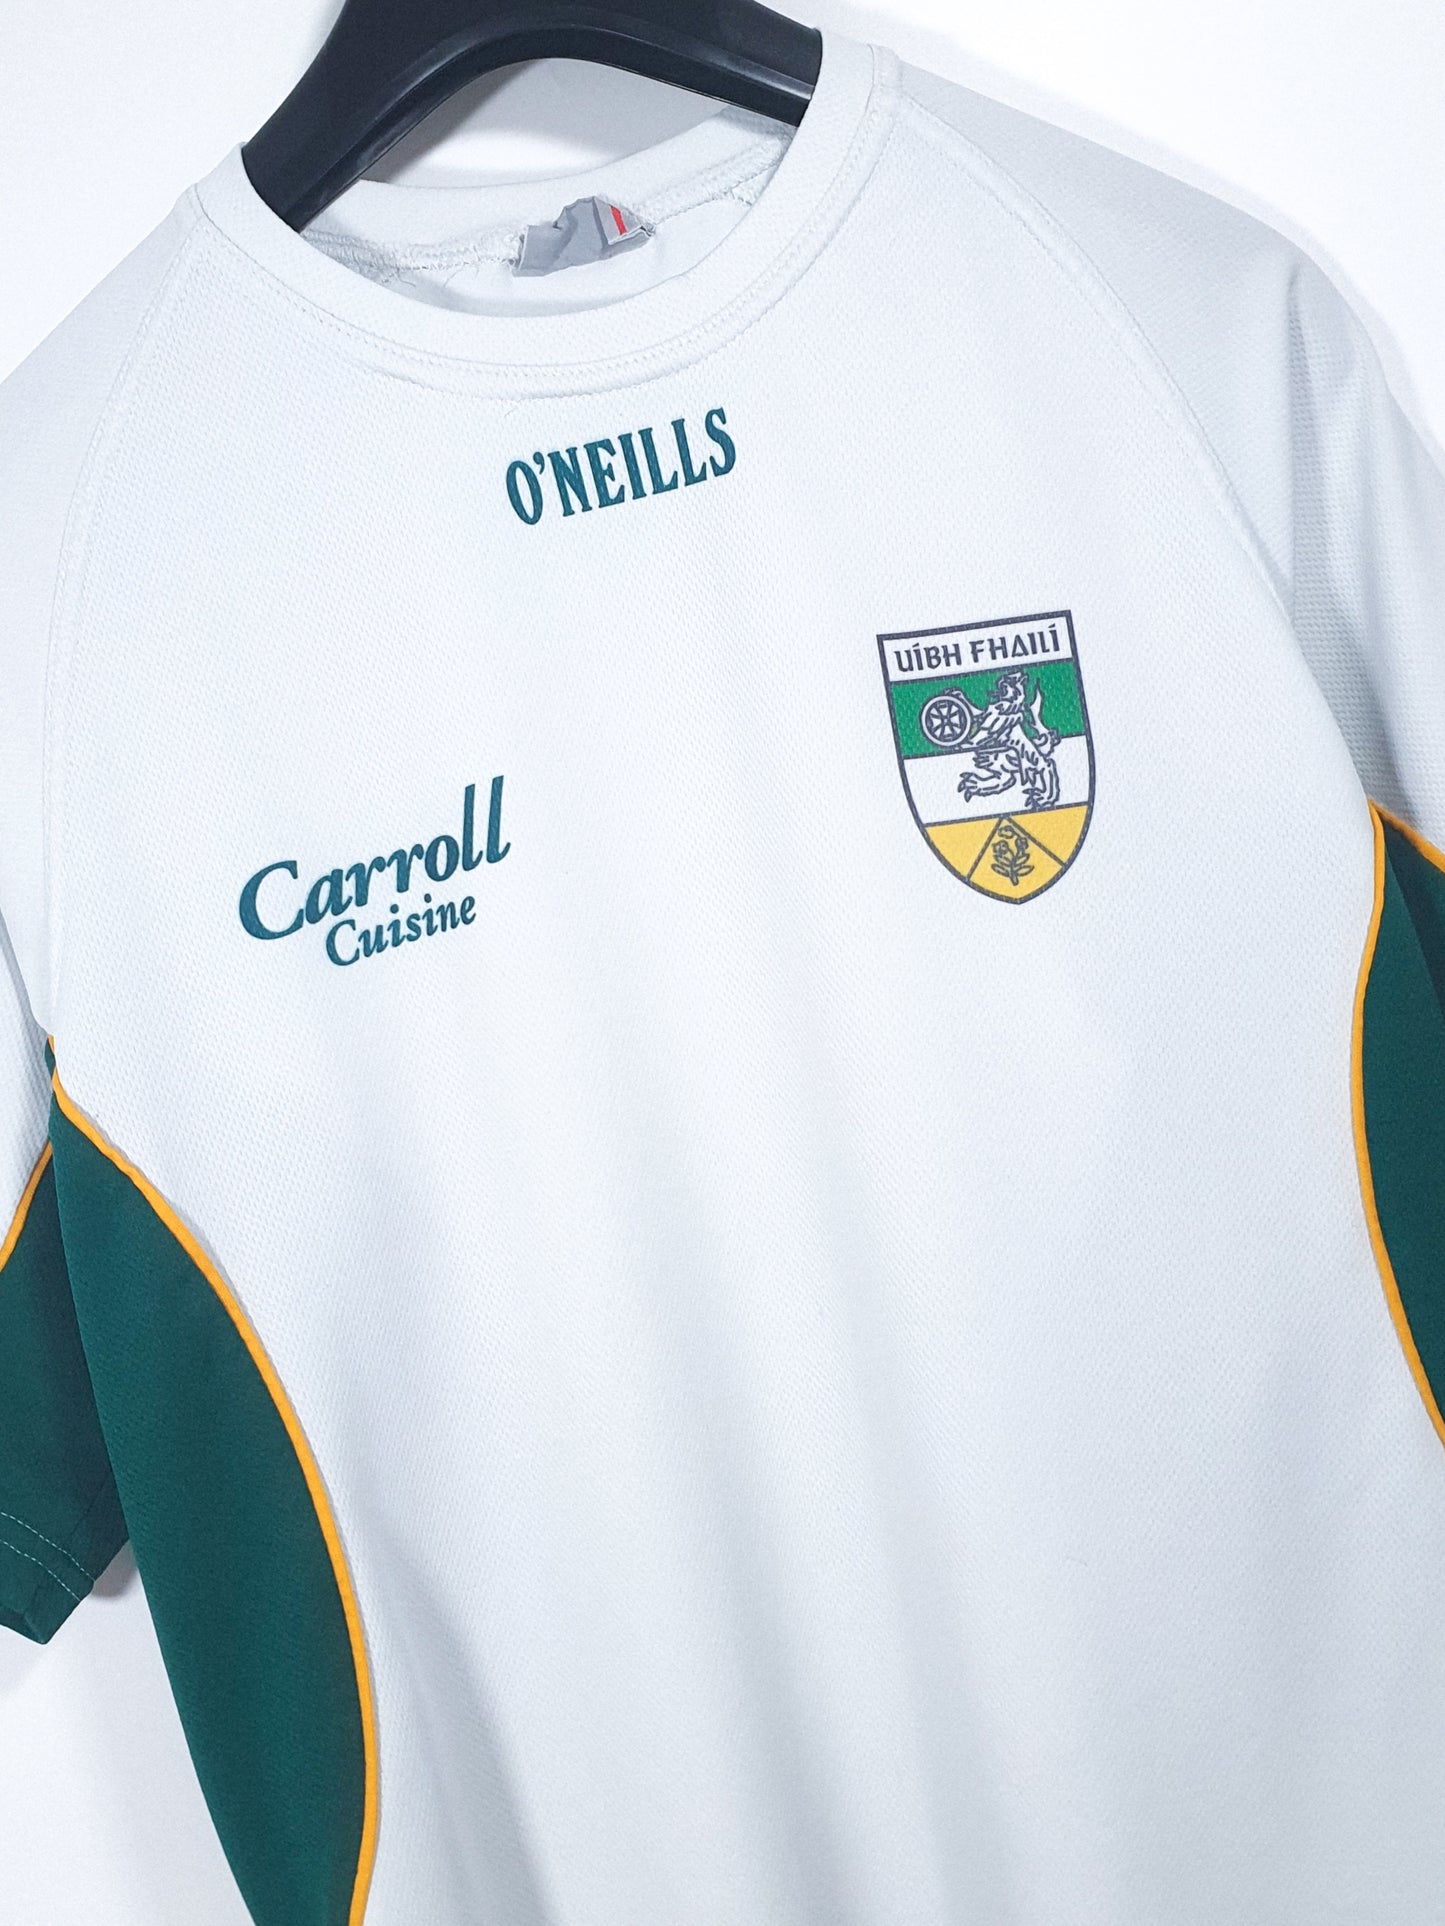 Offaly Training Jersey 2000s (L)